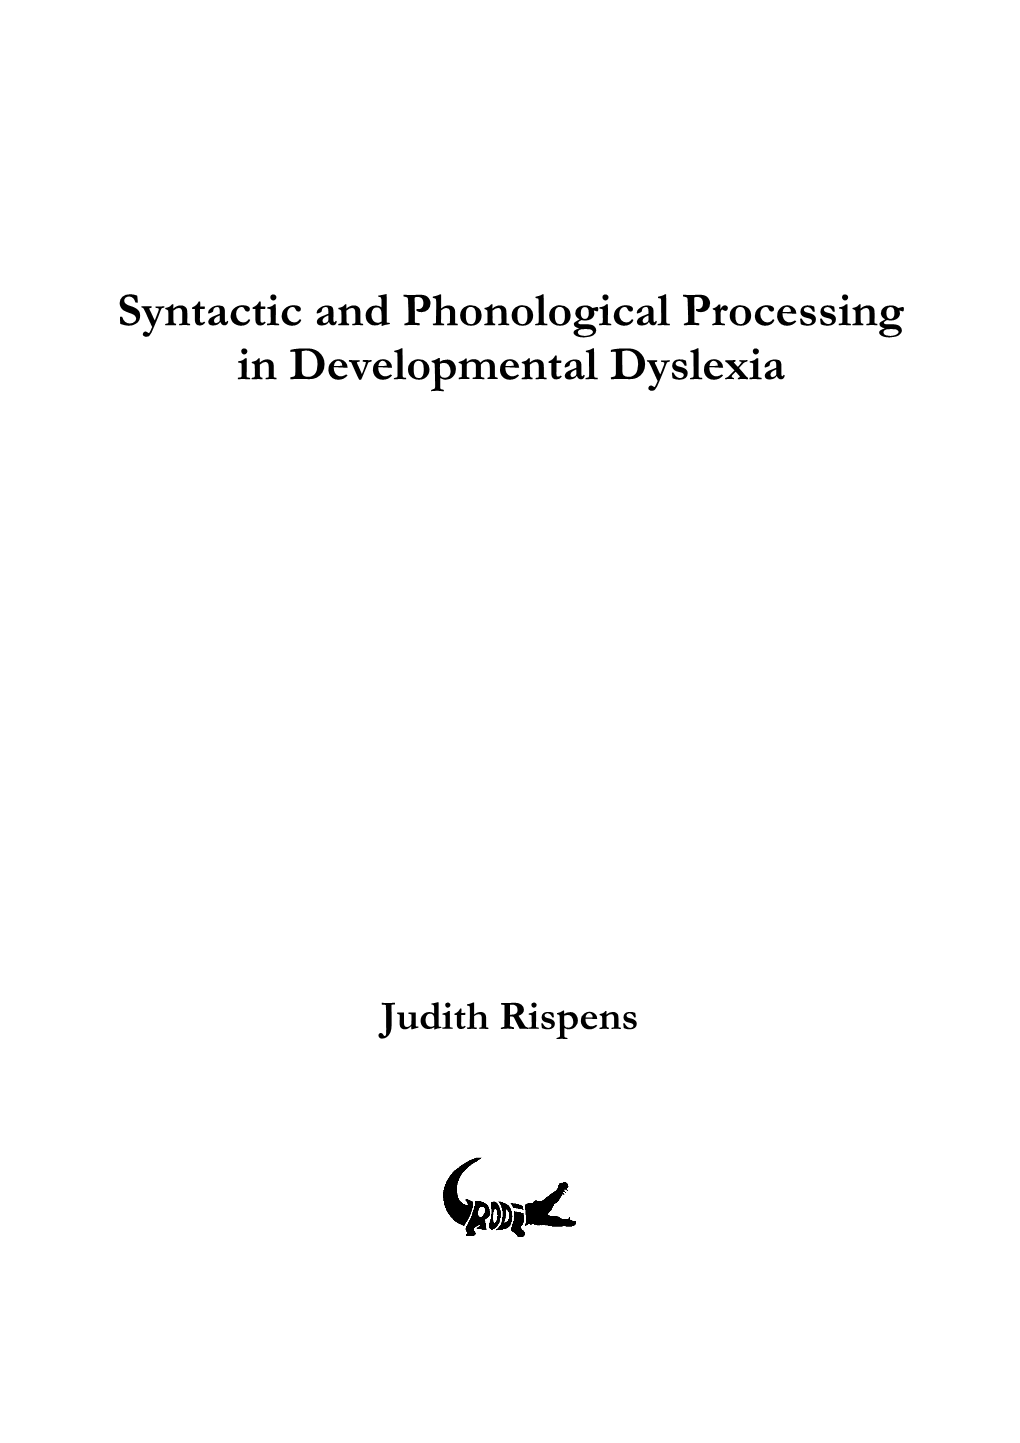 Syntactic and Phonological Processing in Developmental Dyslexia